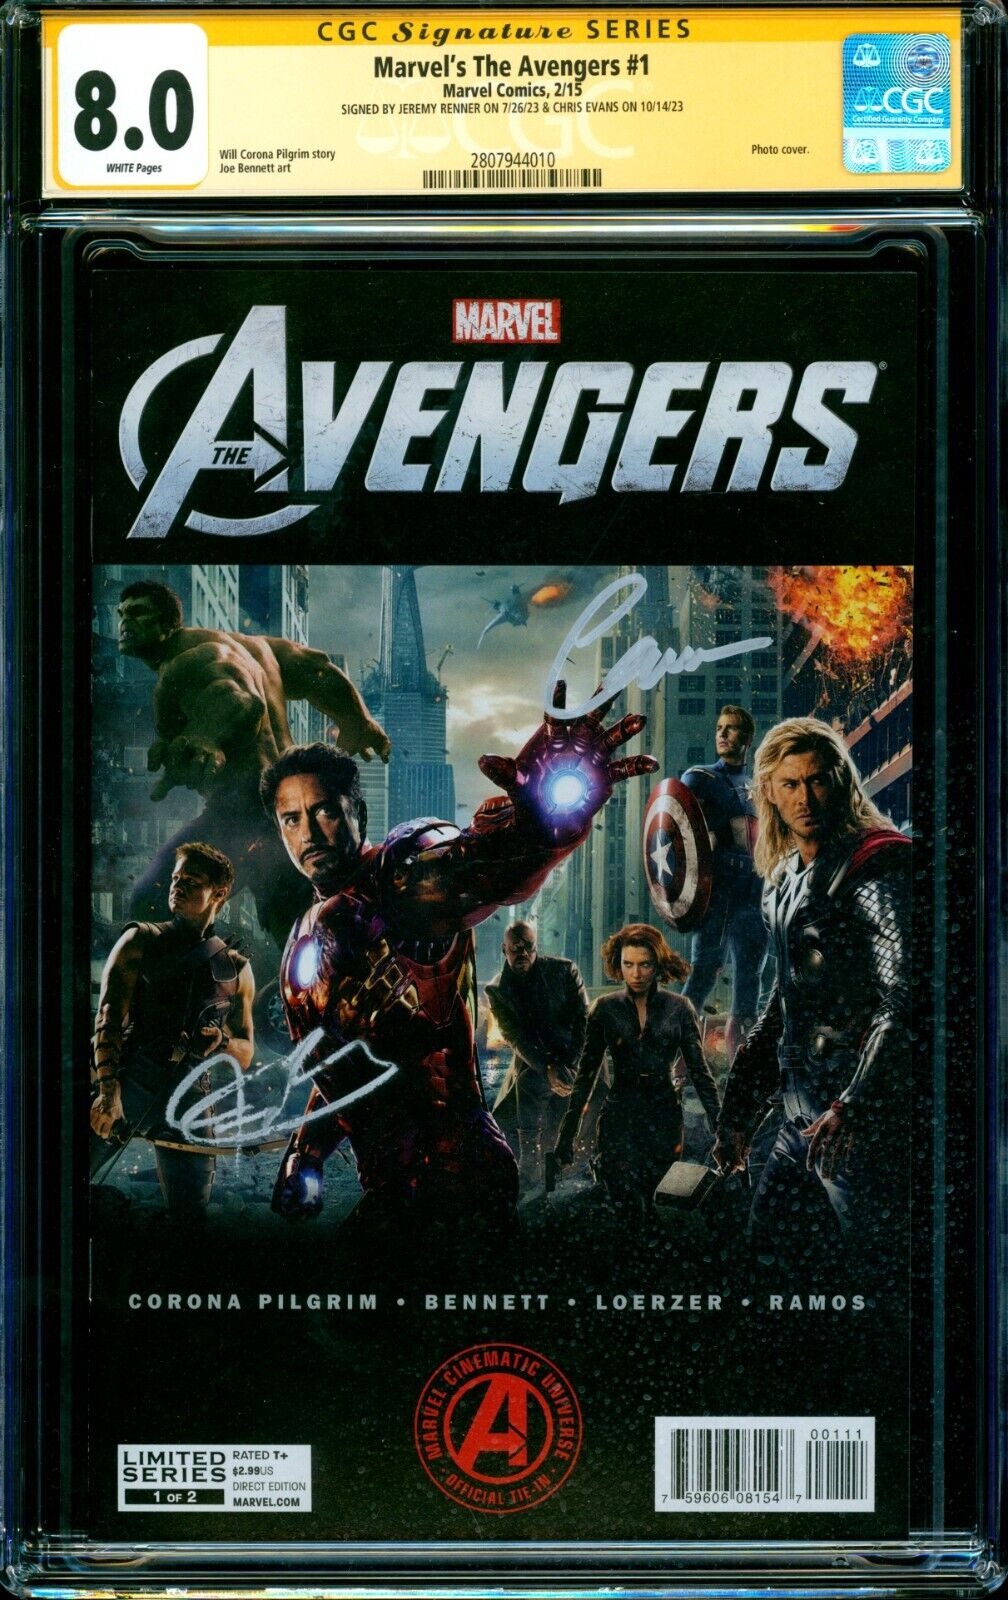 Marvel\'s The Avengers #1 PHOTO COVER CGC SS signed x2 Chris Evans Jeremy Renner